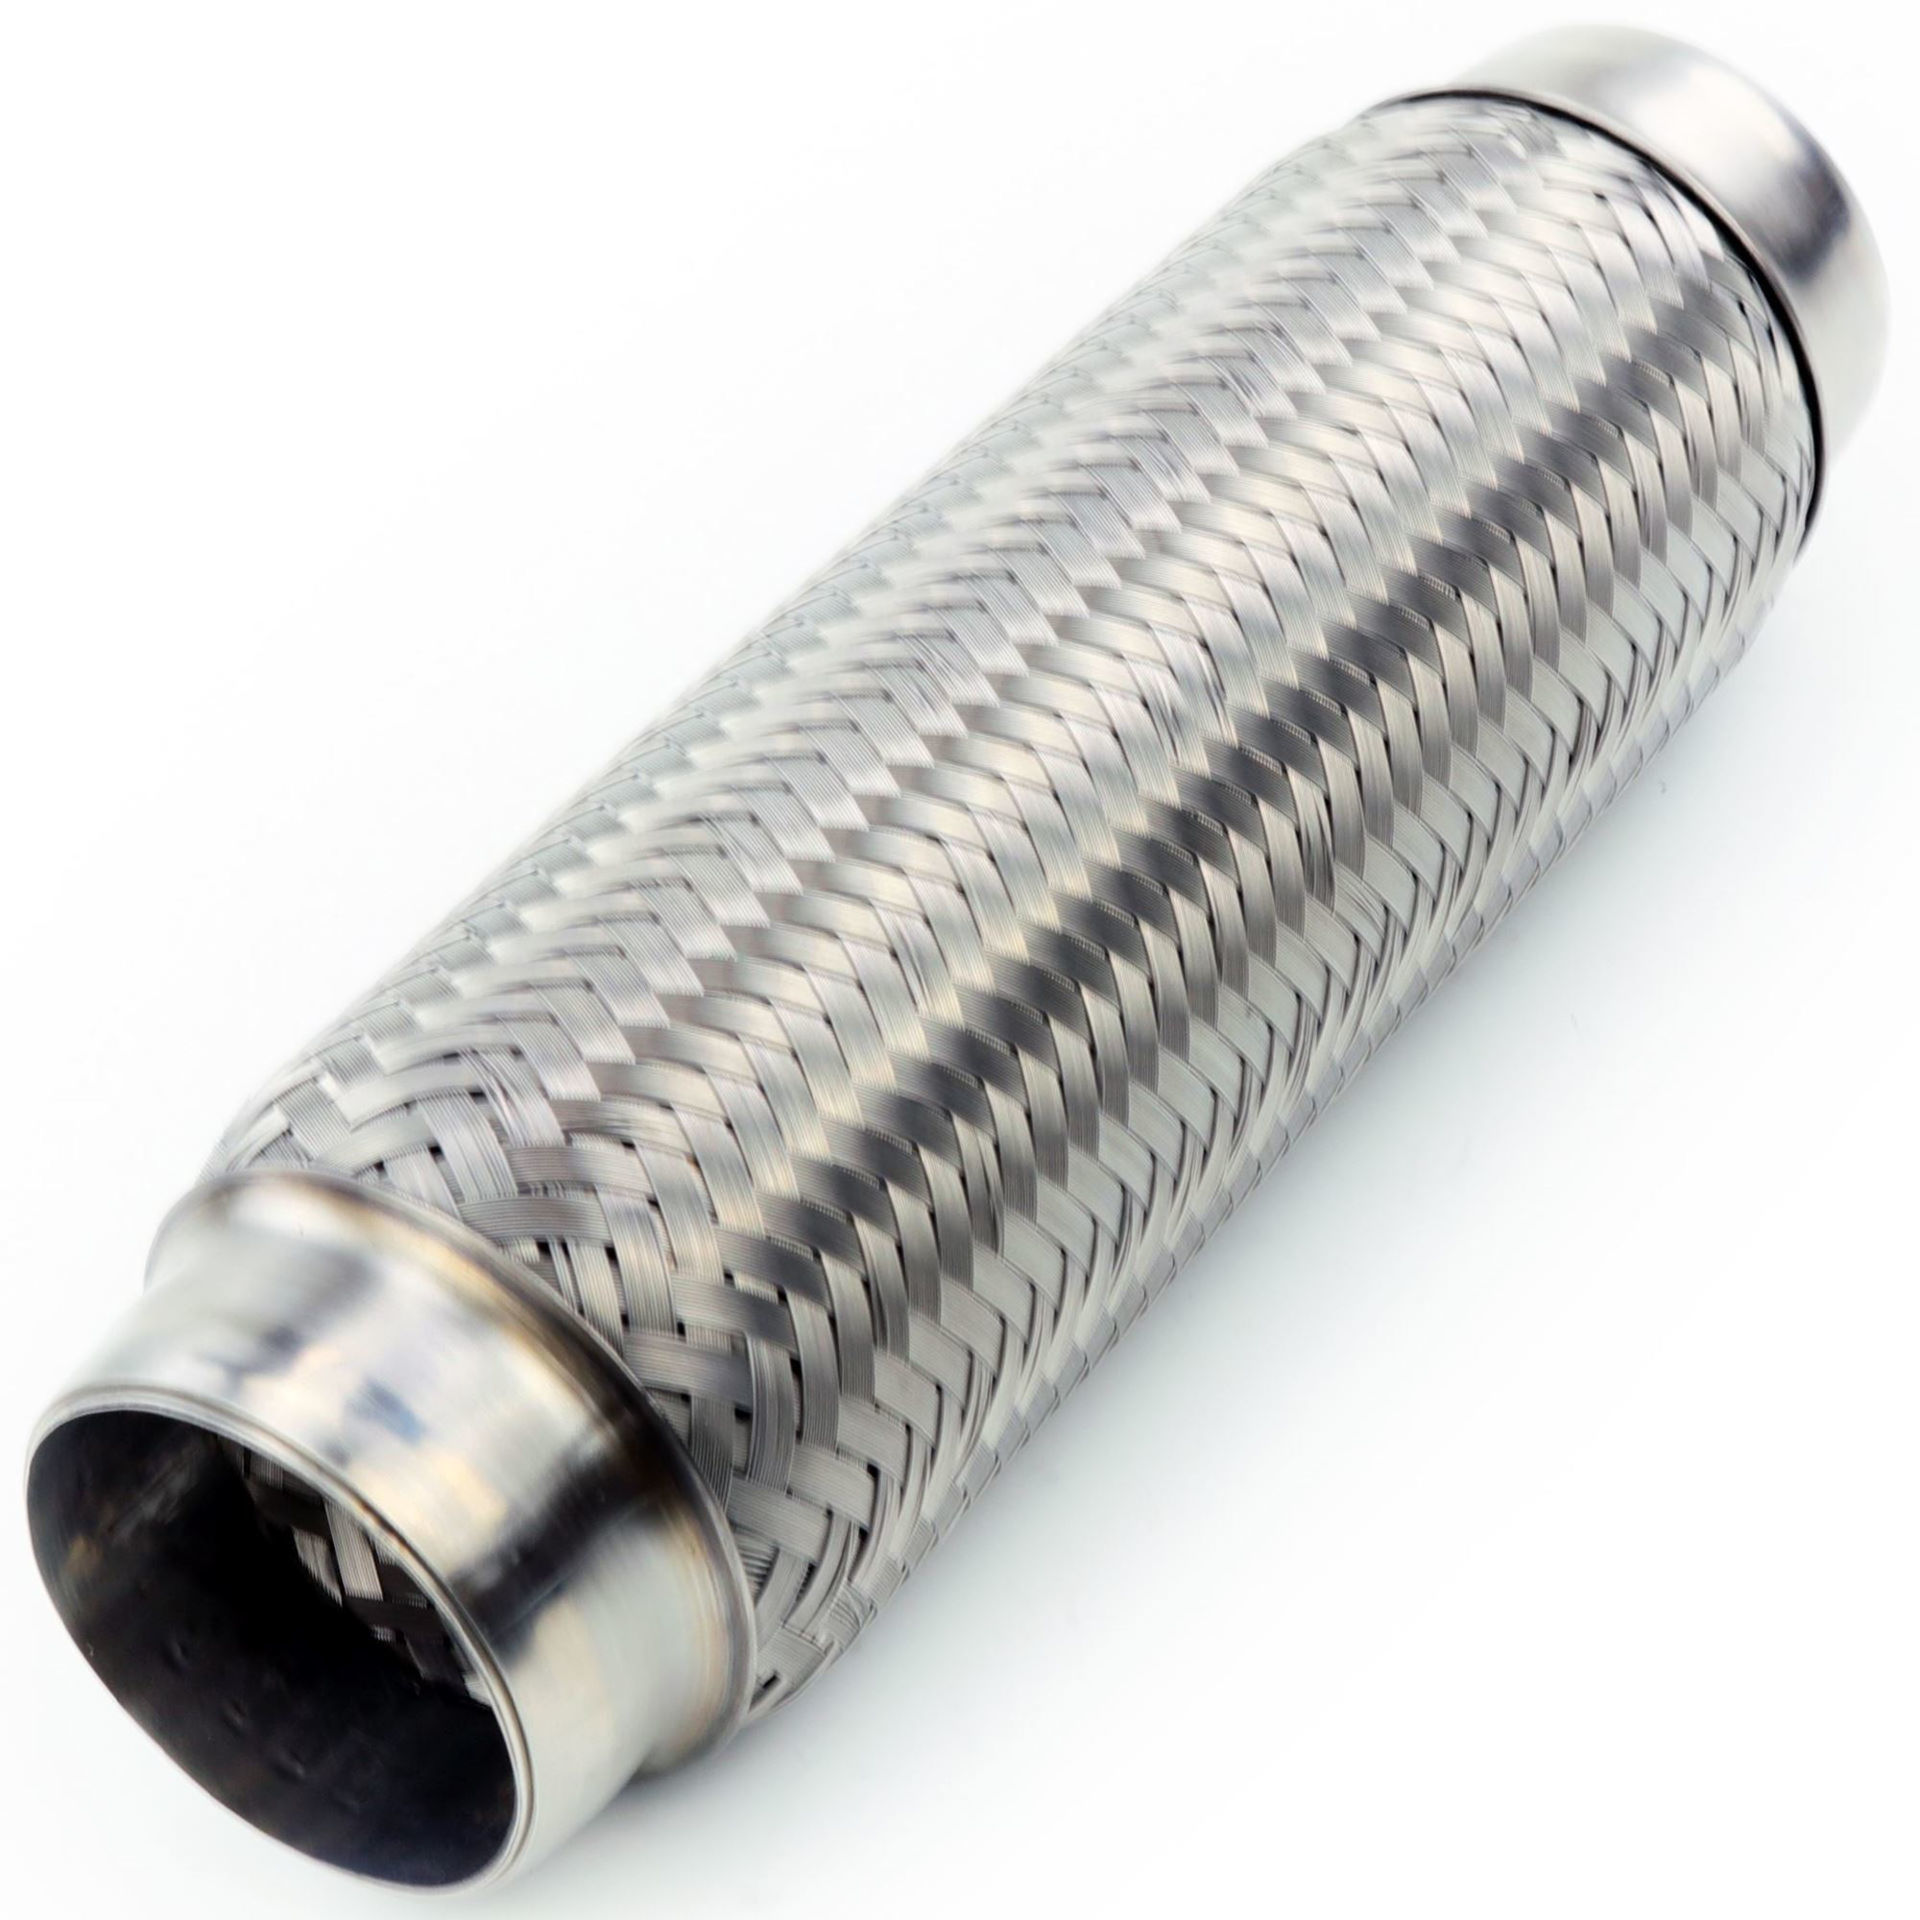 Renewed TOTALFLOW TF-50250 Stainless Steel Double Braided Exhaust Flex Pipe-2 ID x 10 OAL-Without Extensions 